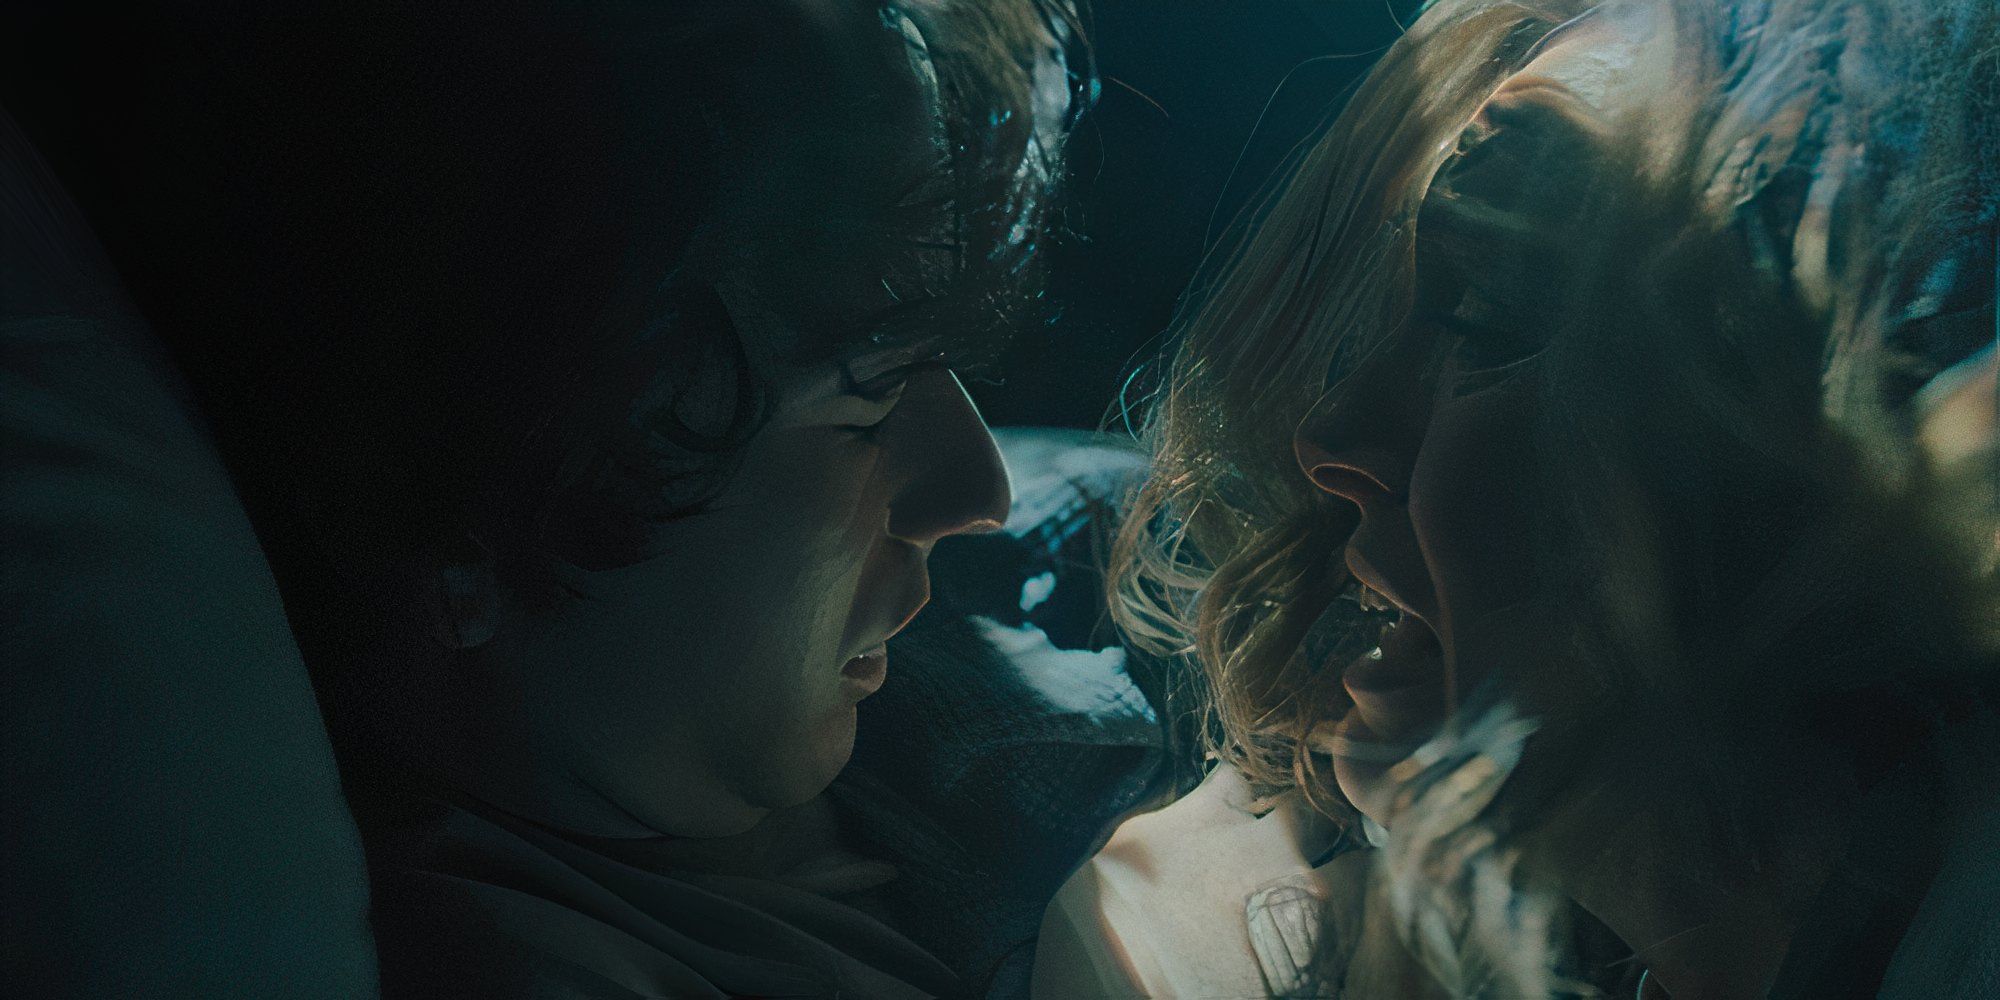 Toni Collette as Annie looking at Alex Wolff as Peter in Hereditary.